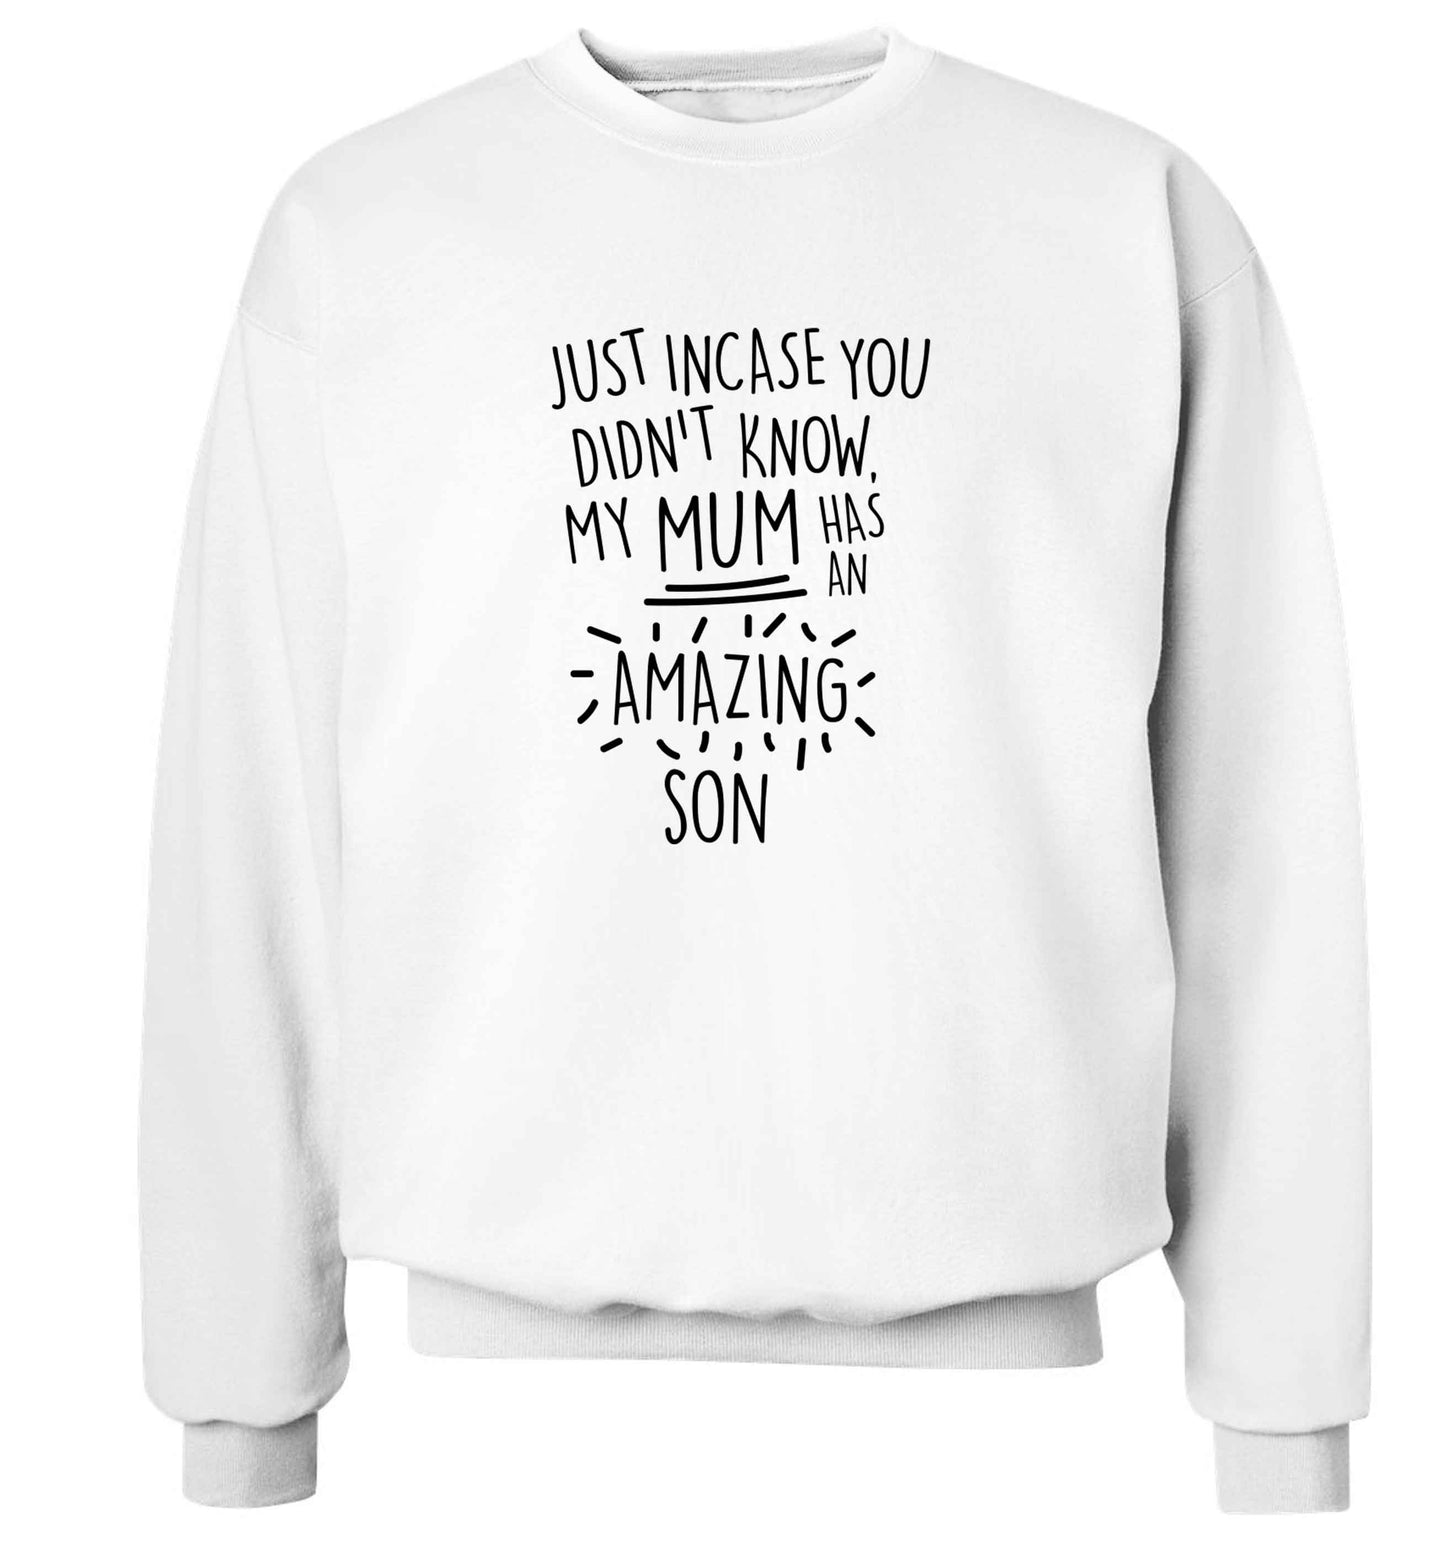 Just incase you didn't know my mum has an amazing son adult's unisex white sweater 2XL